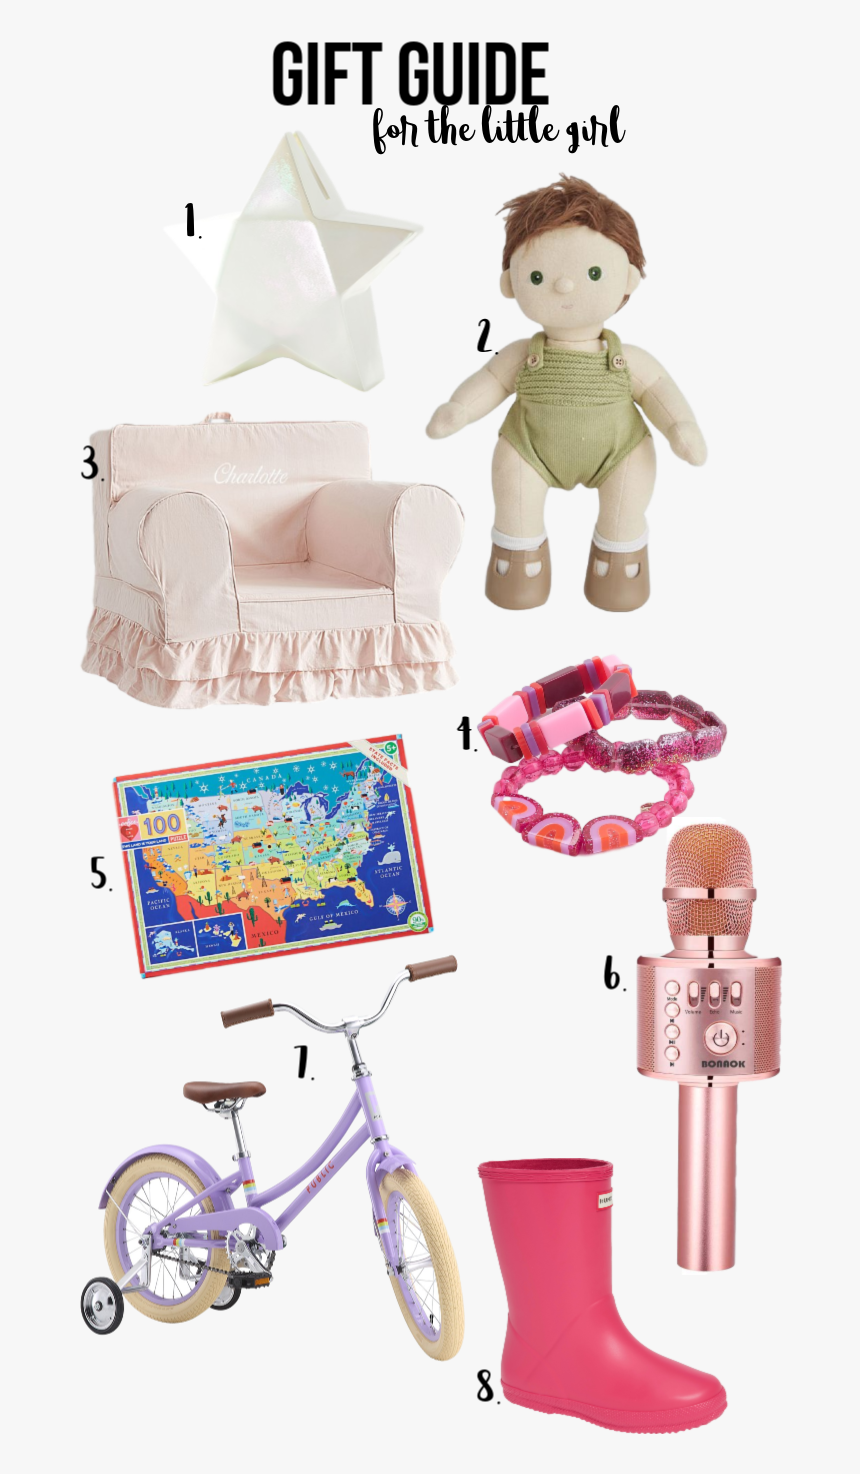 Gift Guide For The Little Girl - Baby Toys, HD Png Download, Free Download